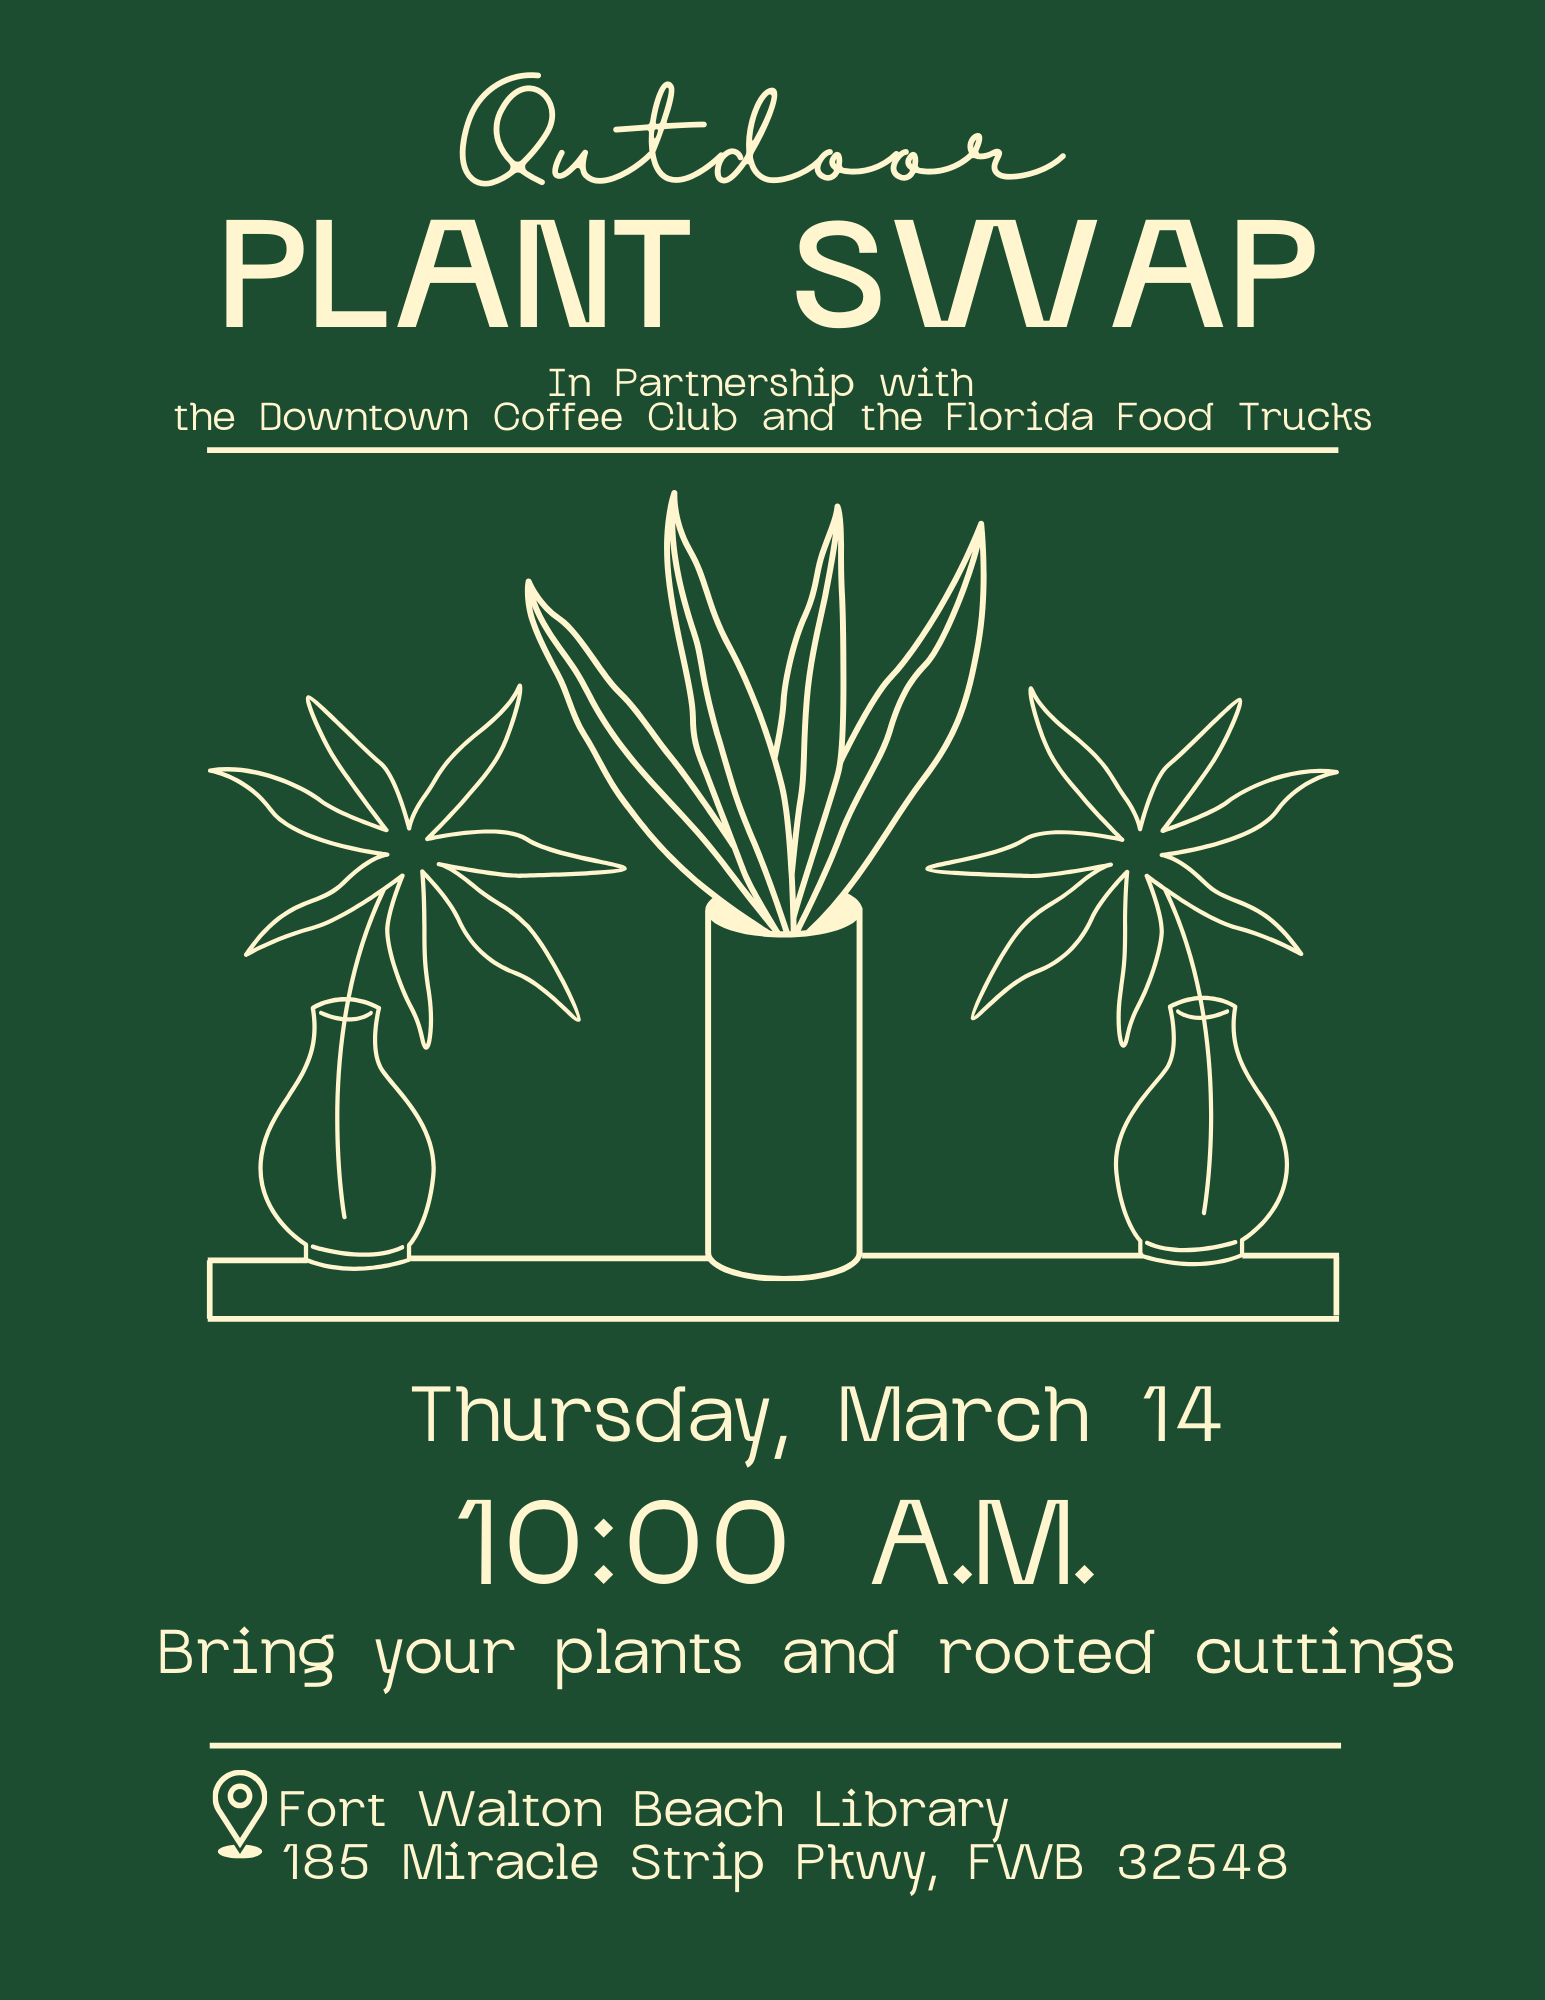 Outdoor Plant Swap in Partnership with the FWB Downtown Coffee Club and the Florida Food Trucks